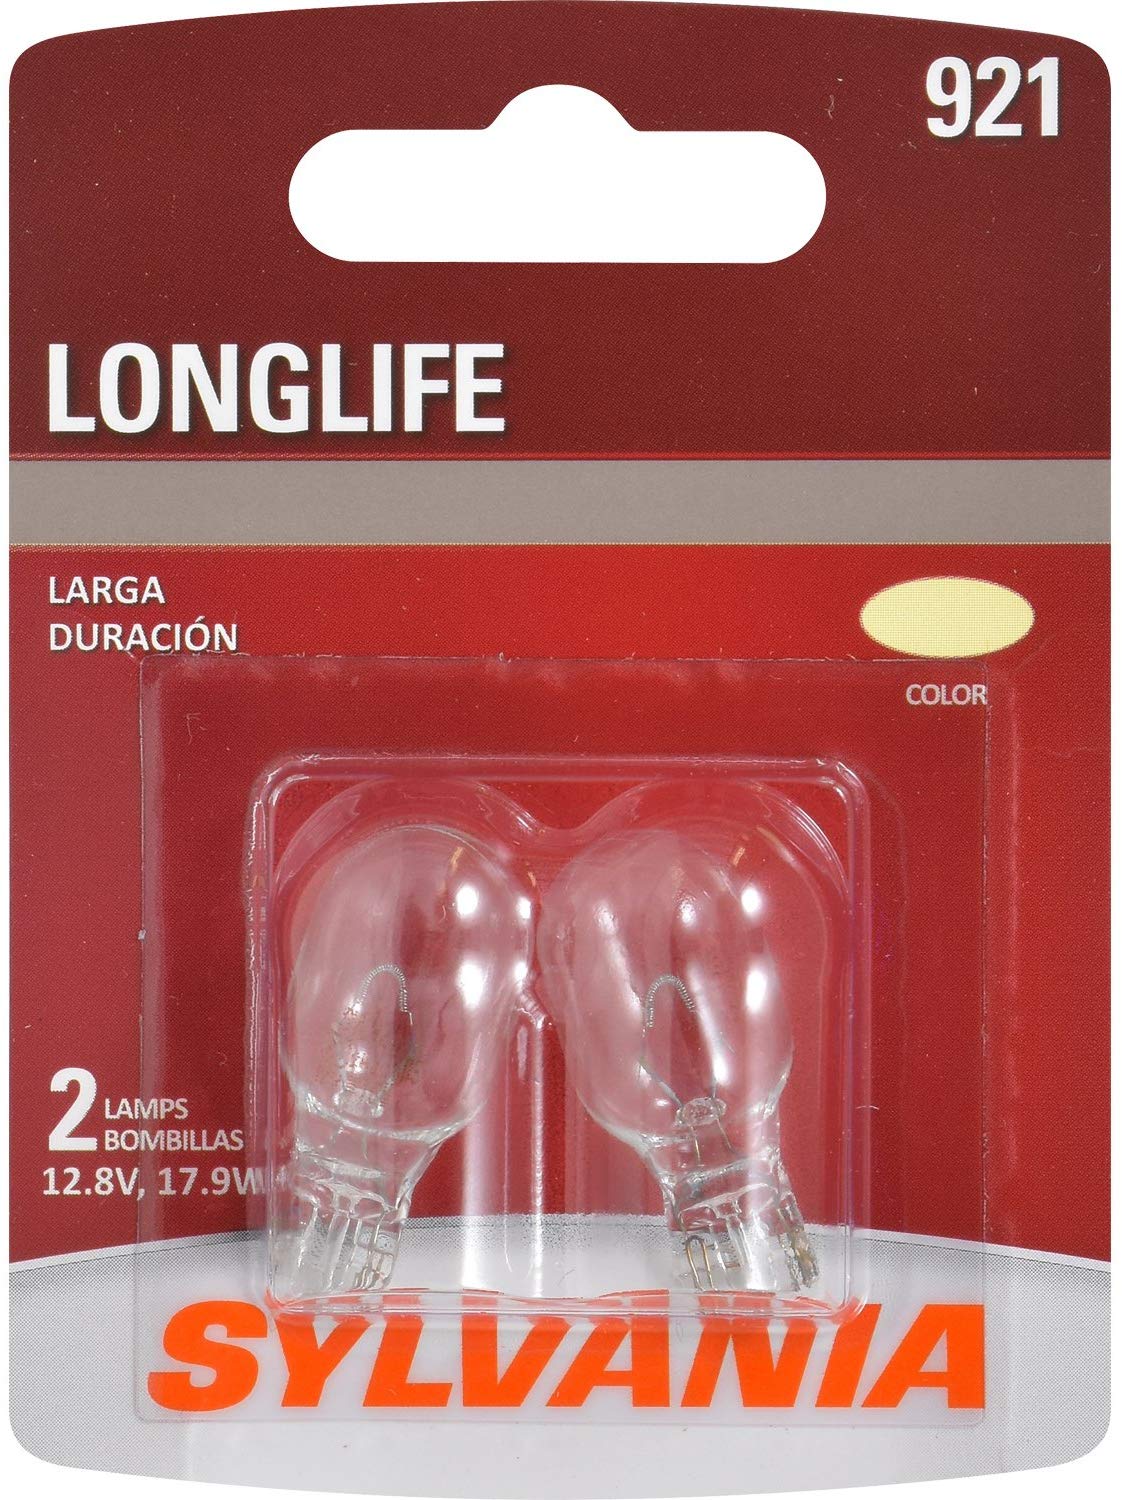 SYLVANIA - 921 Long Life Miniature - Bulb, Ideal for Interior Lighting - Cargo and License Plate (Contains 2 Bulbs)